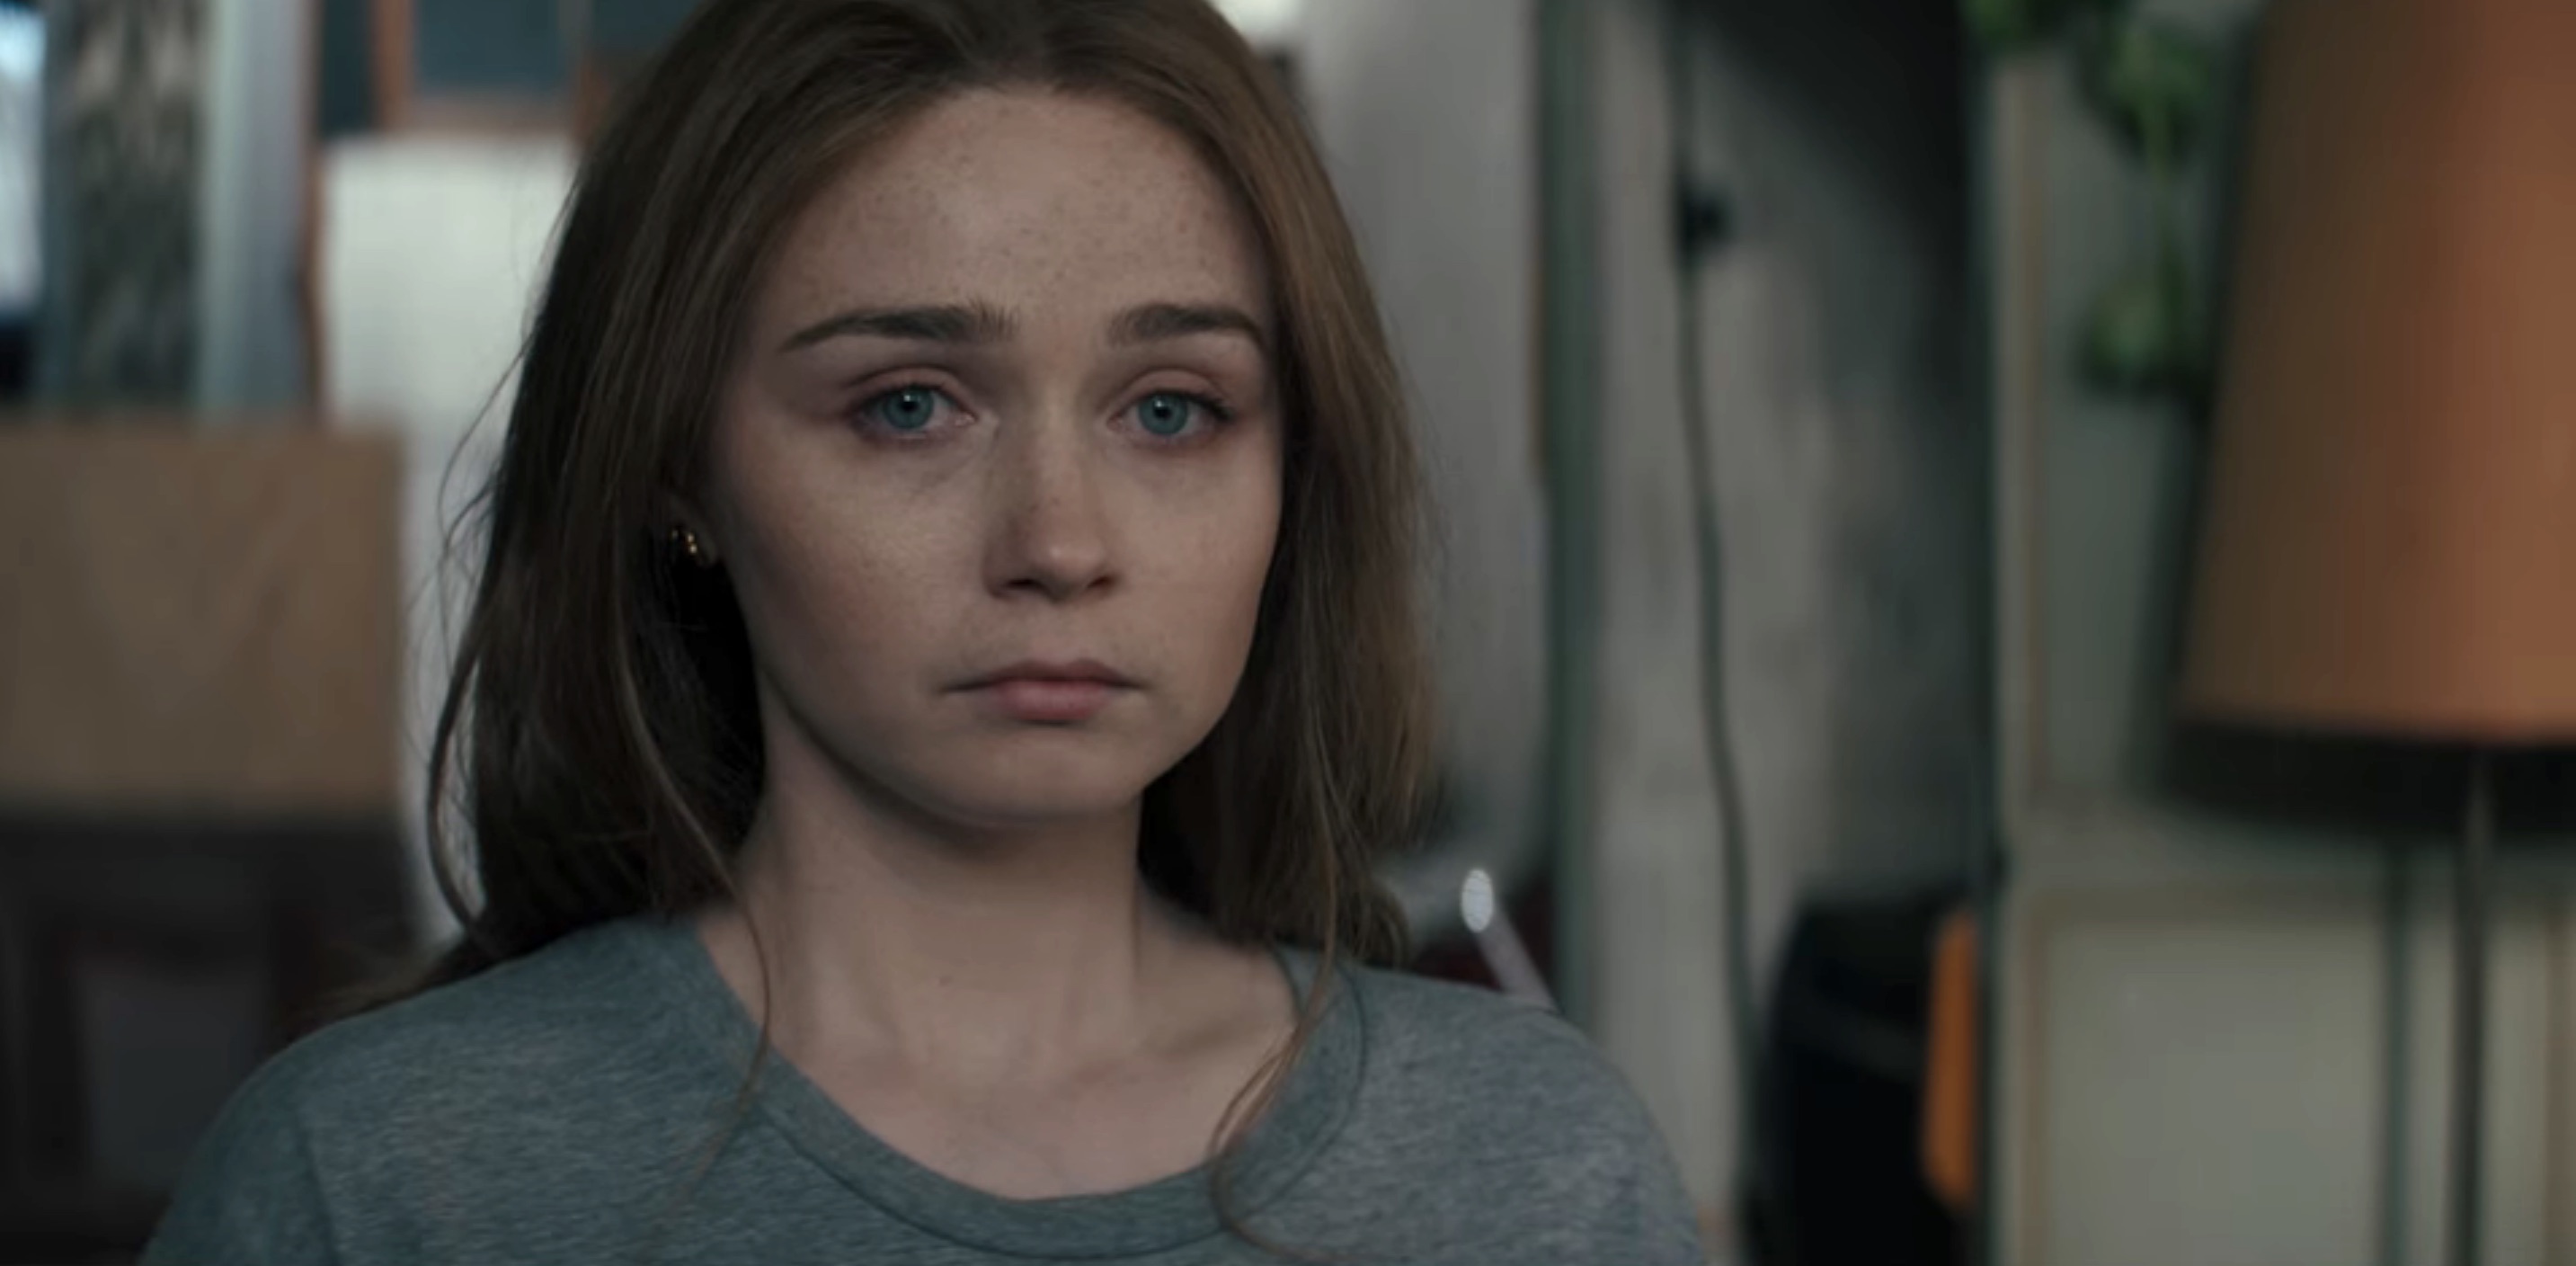 Pieces of Her Cast on Netflix - Jessica Barden as Jane